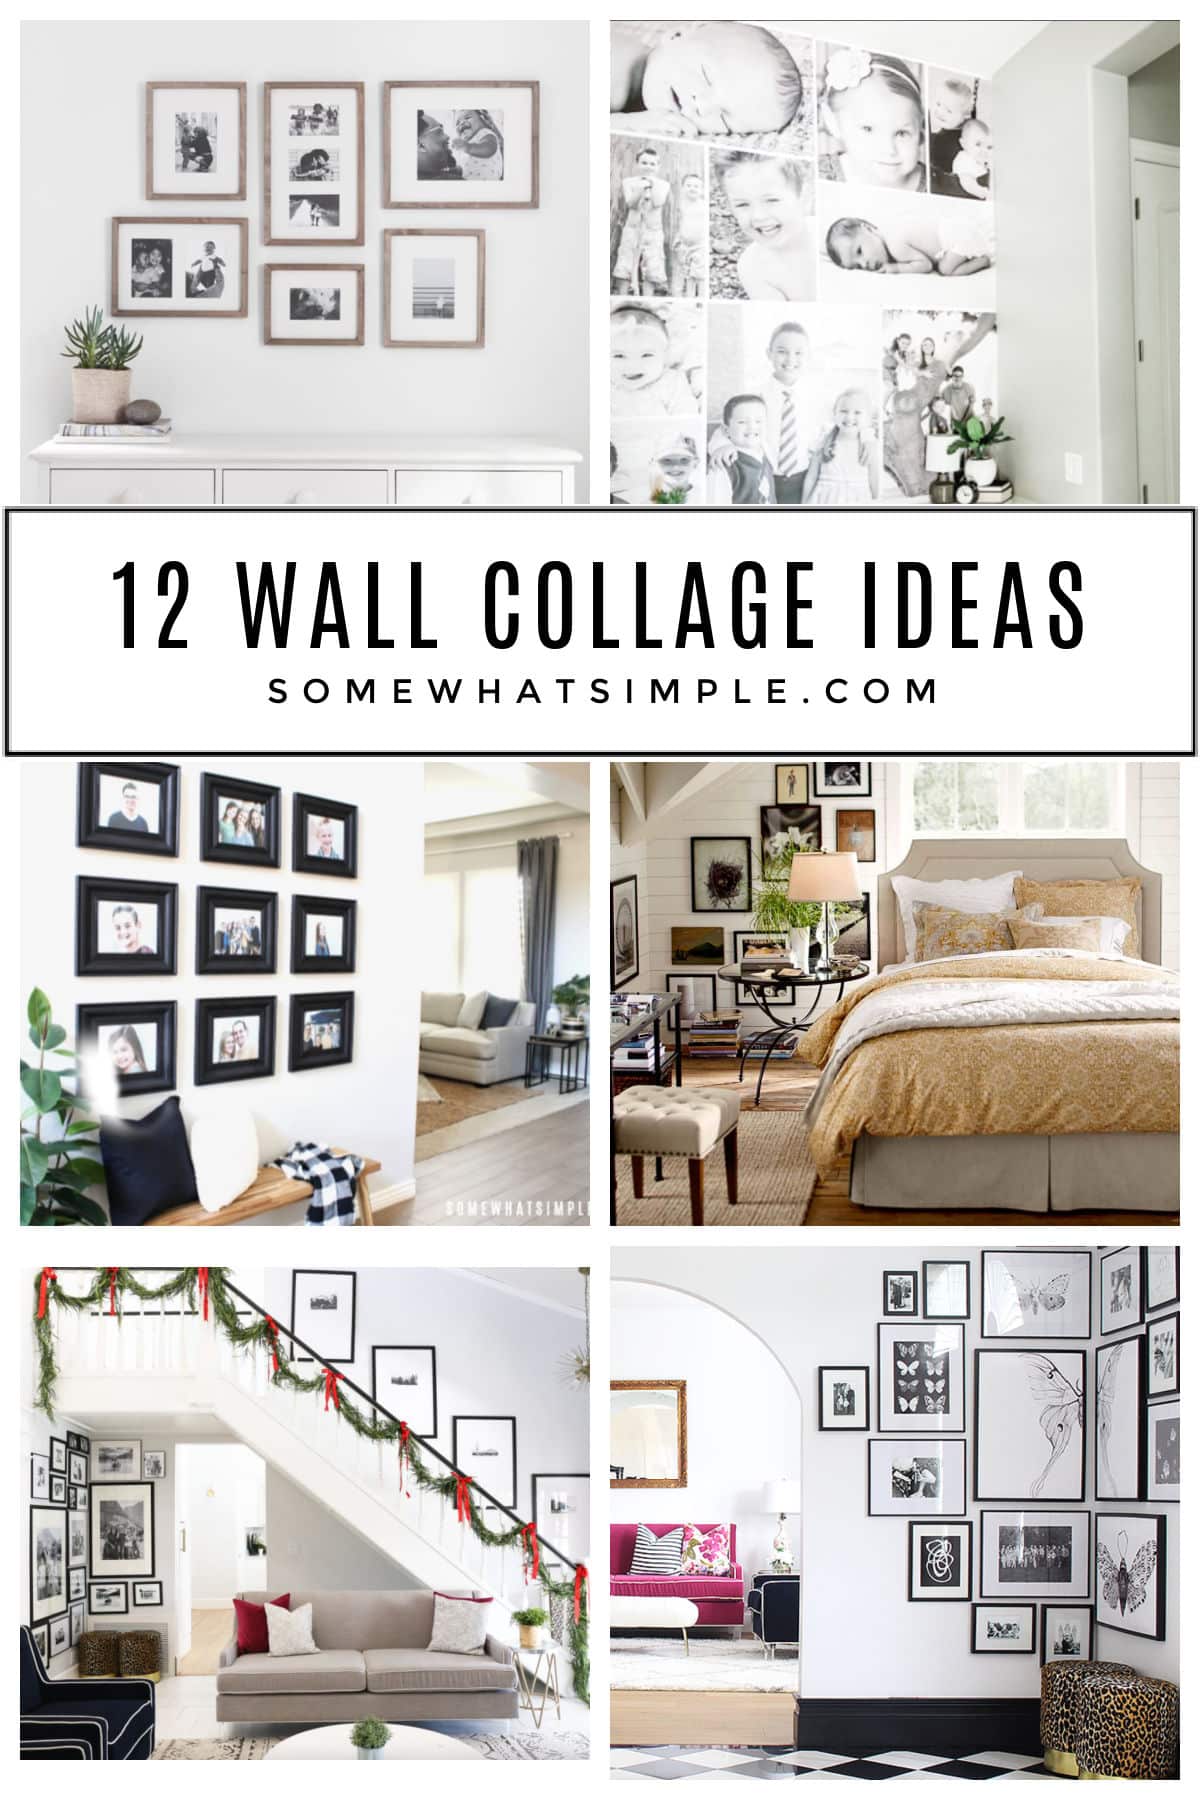 The simplest spaces can be made AMAZING with a little creativity! Here are 12 ways to create an awesome wall collage in your home. via @somewhatsimple